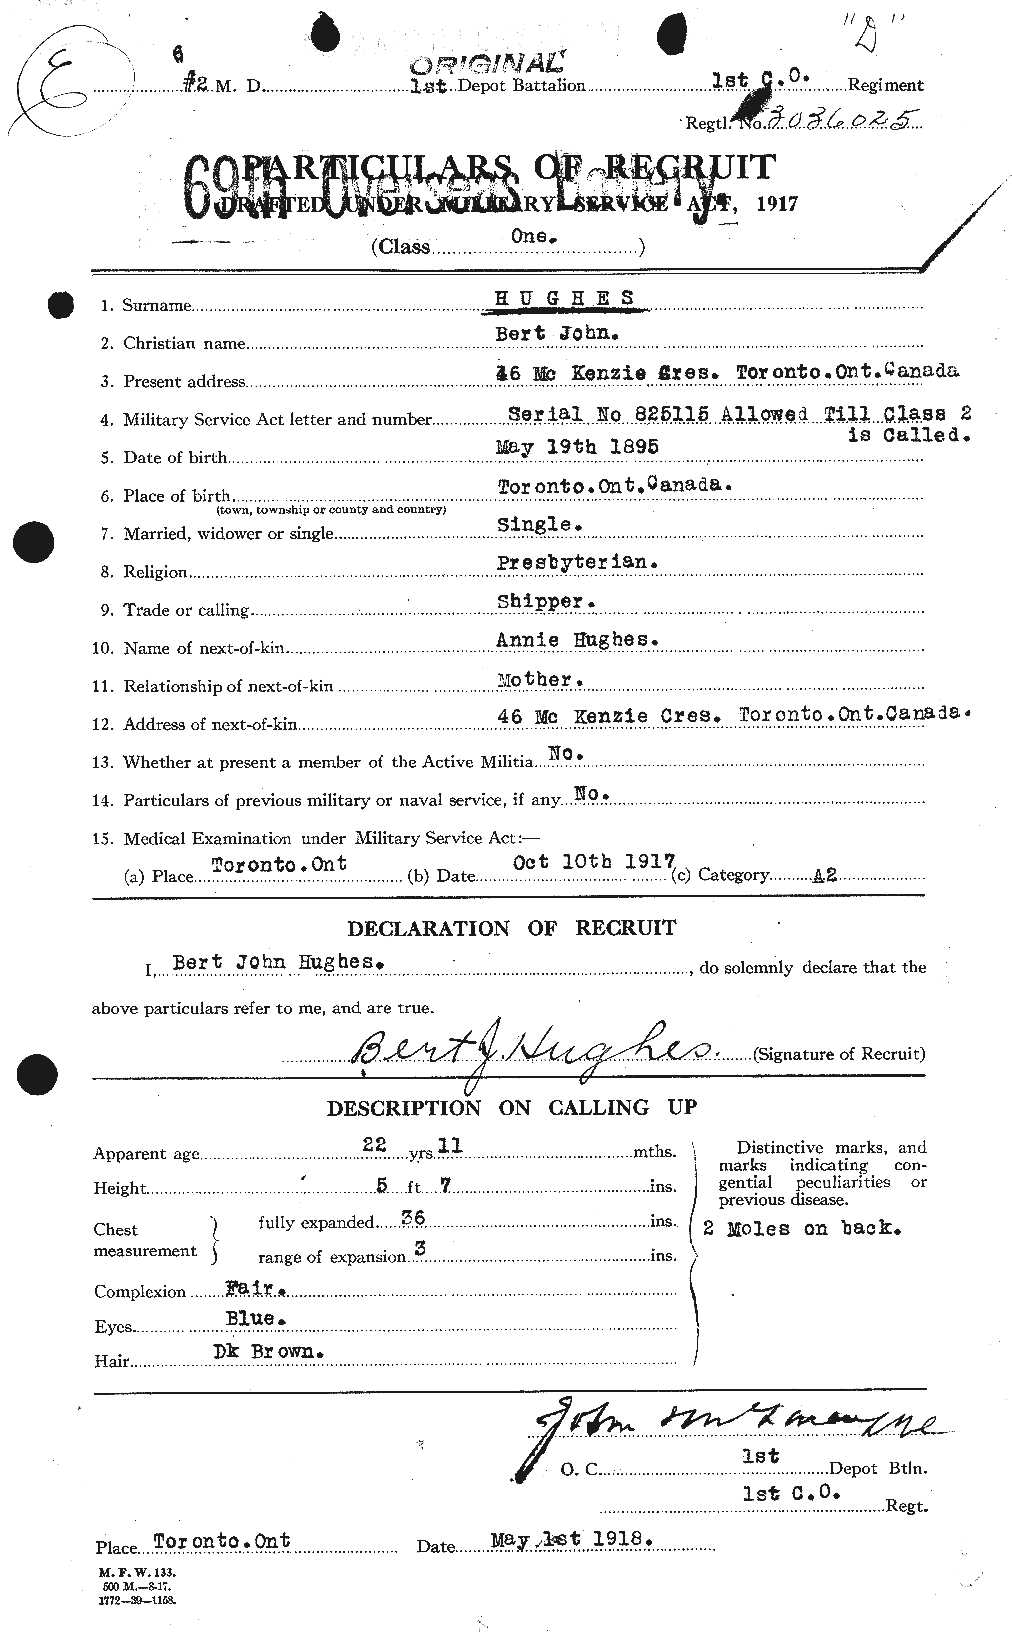 Personnel Records of the First World War - CEF 402588a